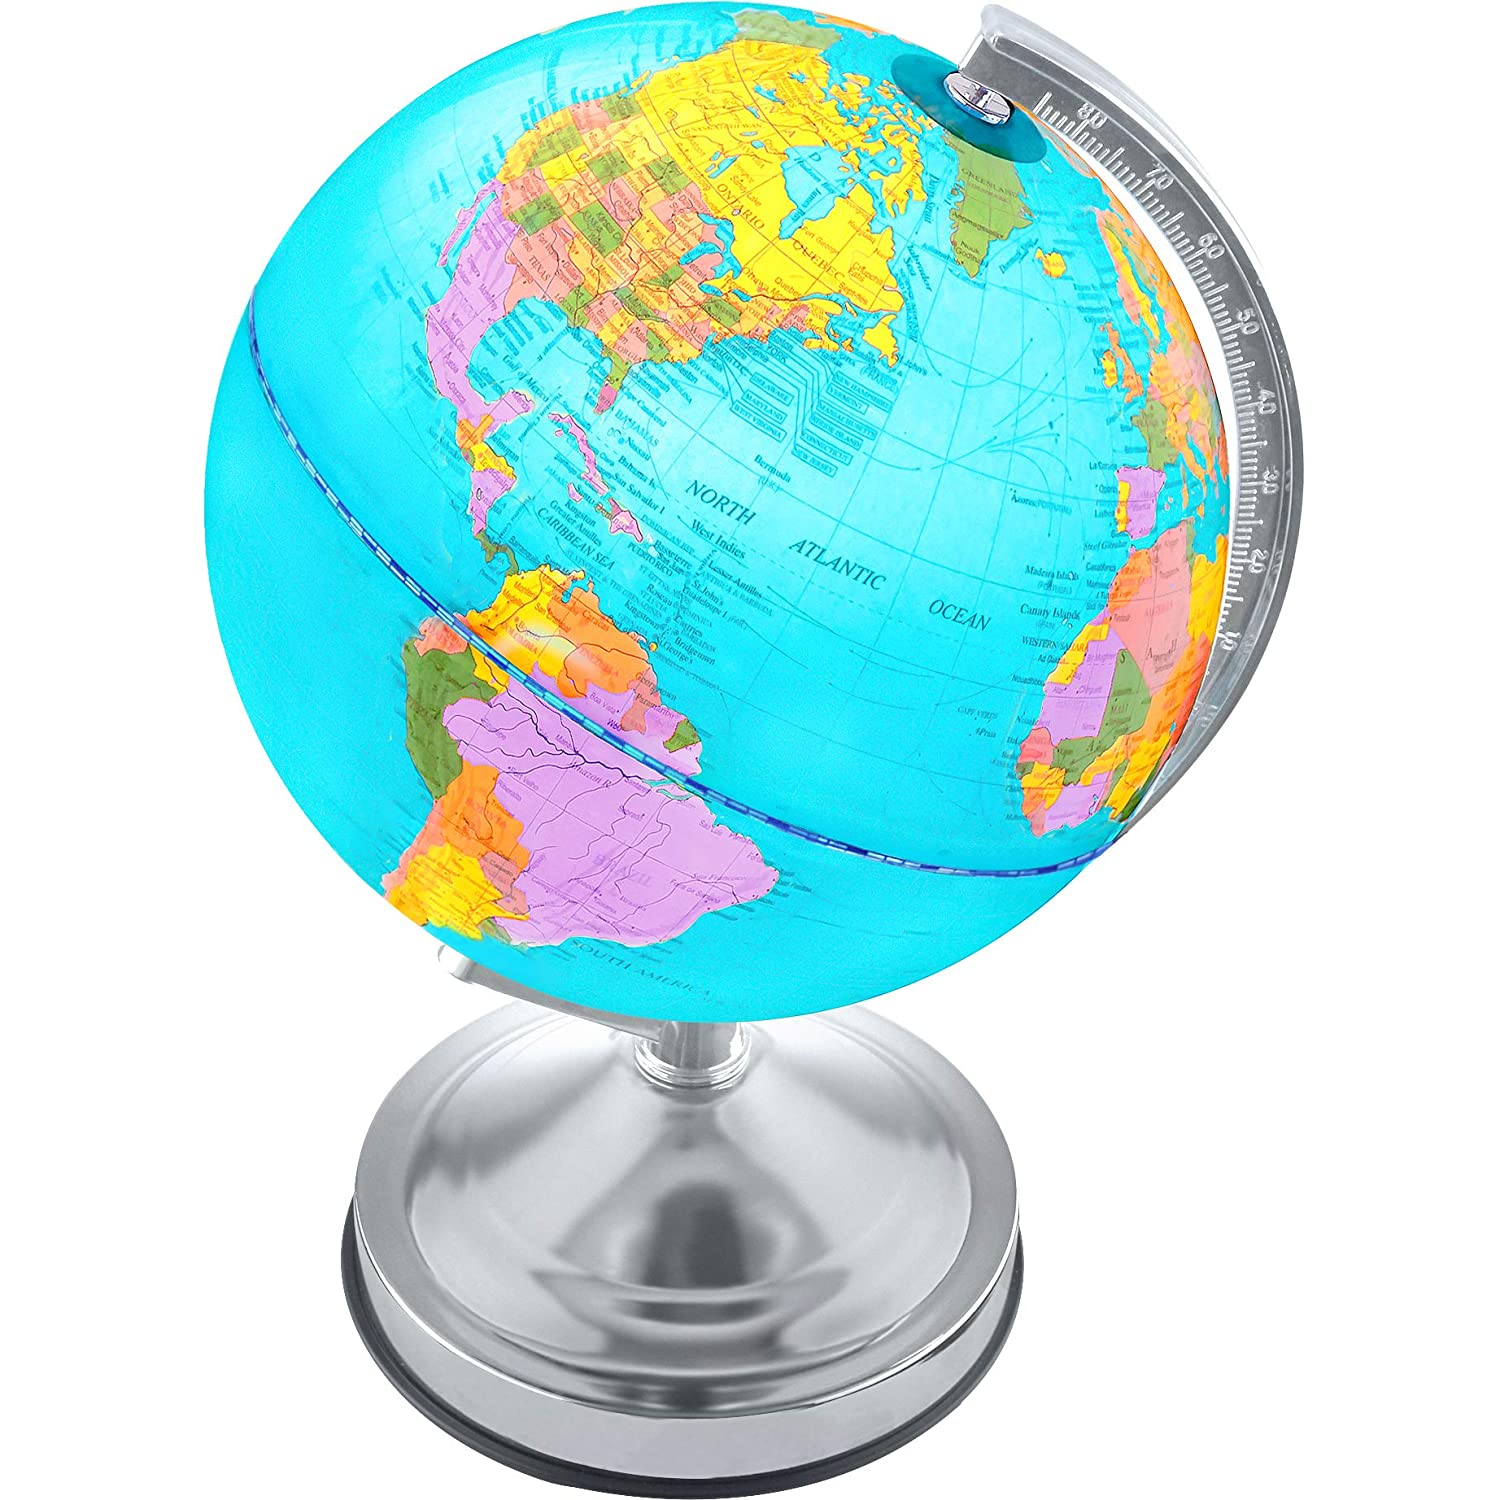 Illuminated Kids Globe with Stand – Educational Gift with Detailed World Map and LED Night Light